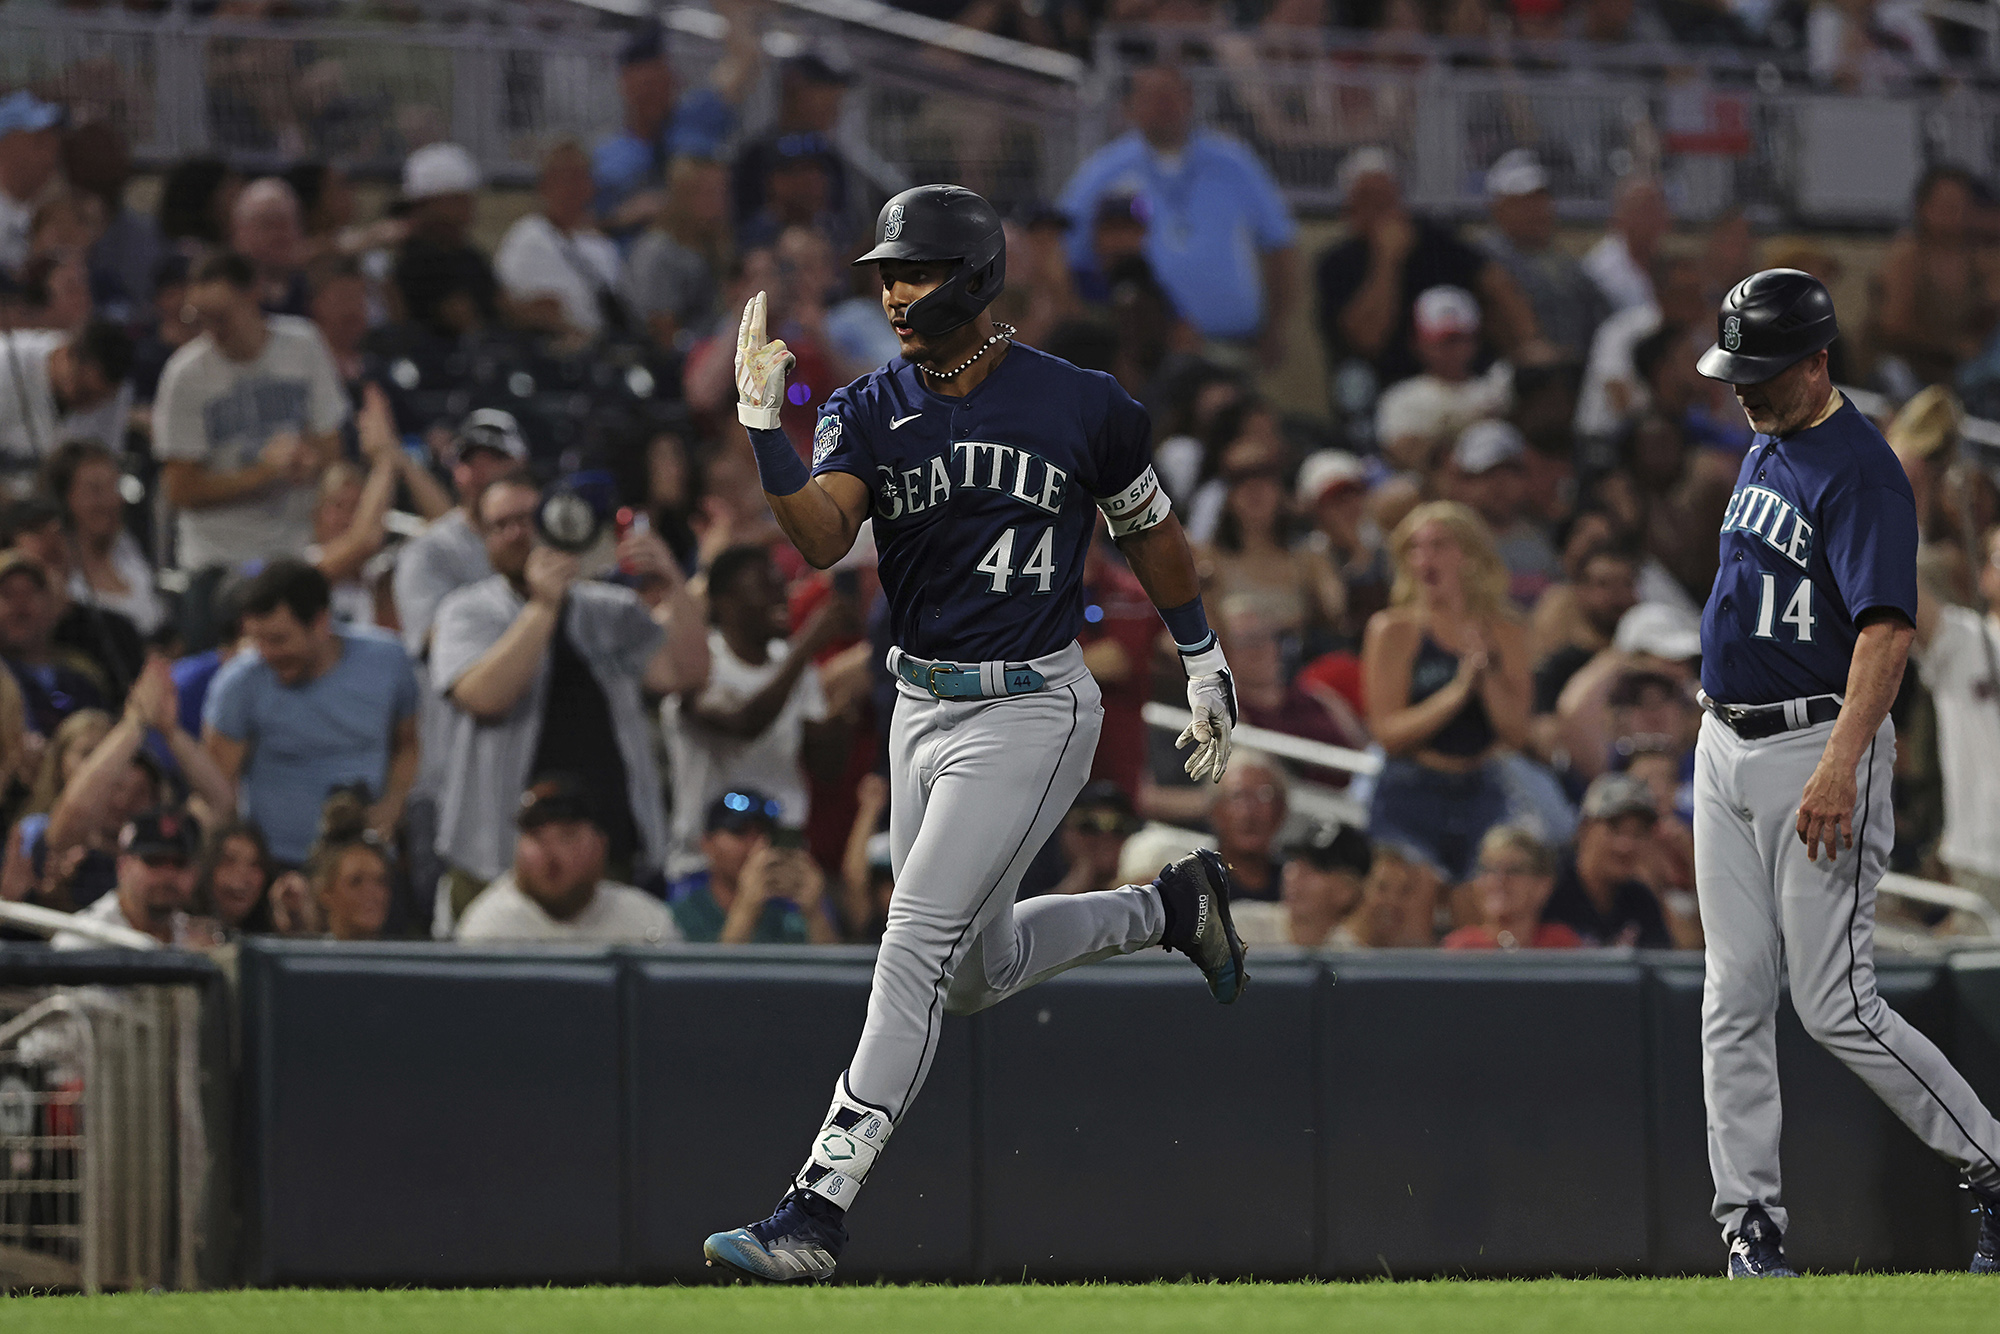 Seattle Mariners' Julio Rodriguez (44) advances toward home base in celebration after hitting a home run during the eighth inning of a baseball game against the Minnesota Twins, Tuesday, July 25, 2023, in Minneapolis.(AP Photo/Stacy Bengs)